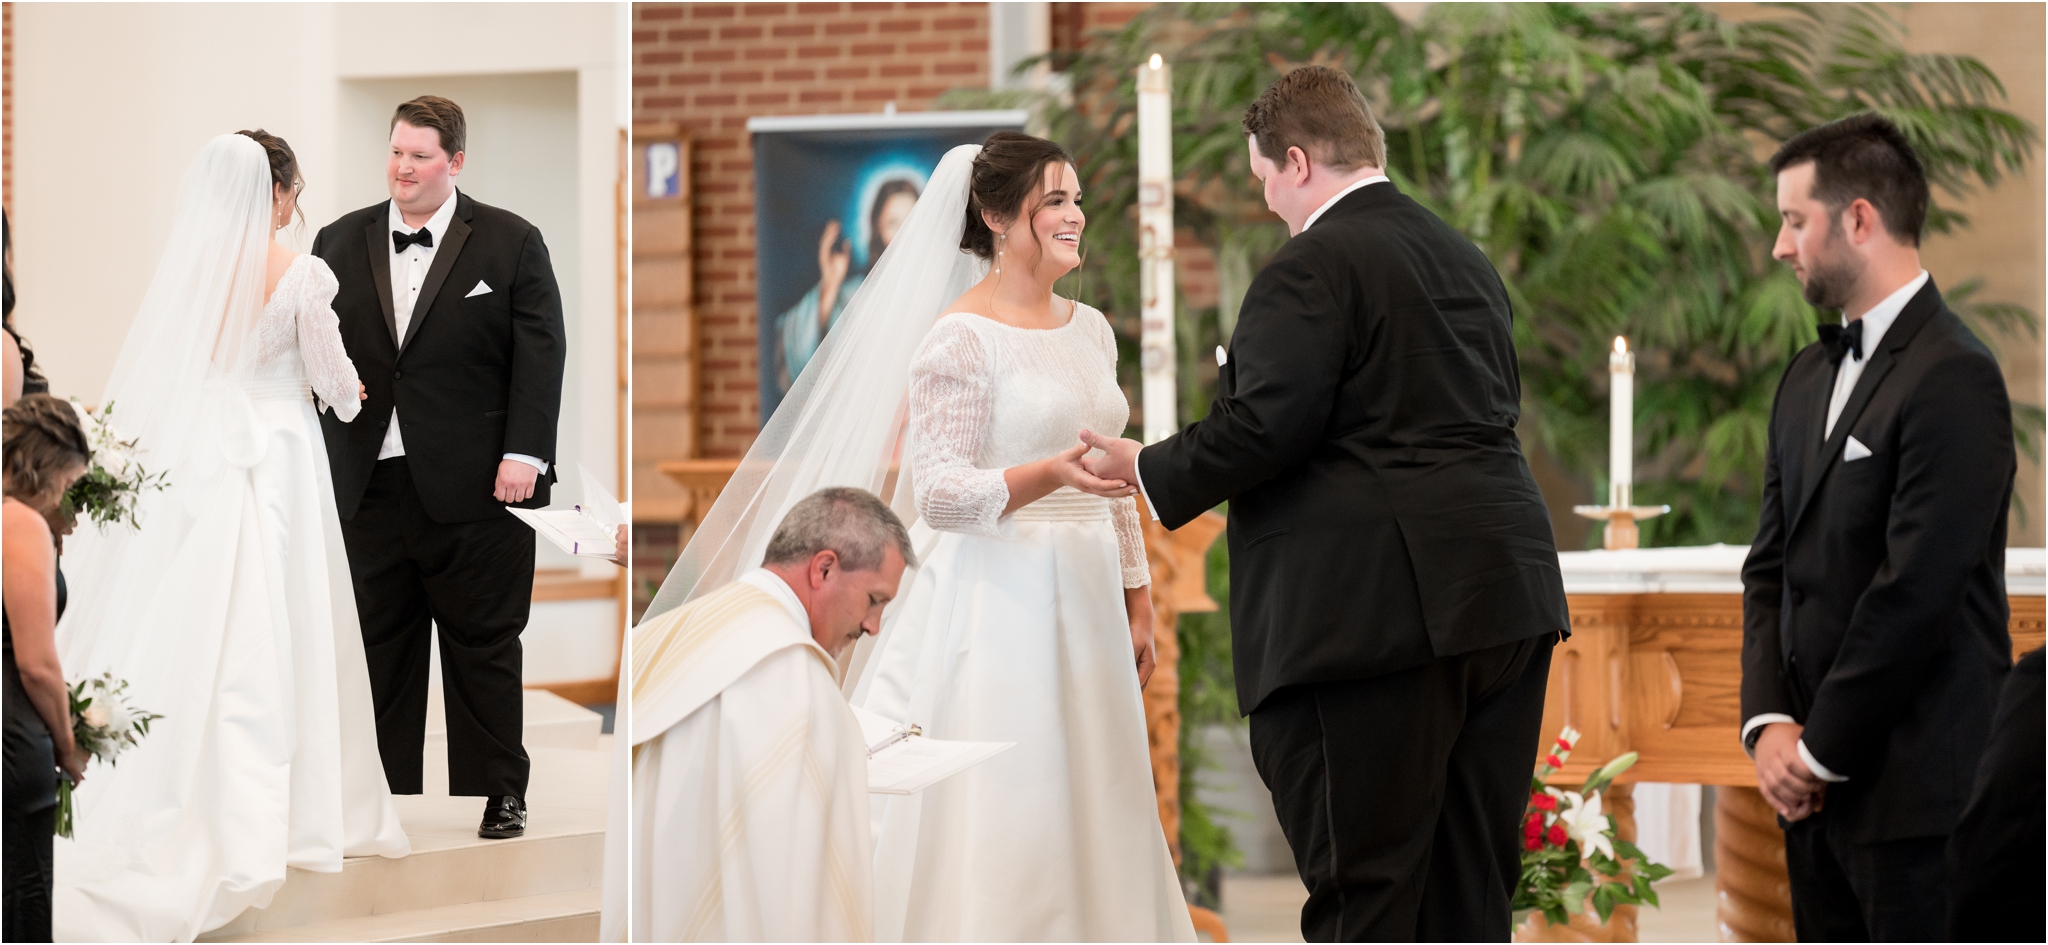 exchanging rings at Saint Maria Goretti westfield indiana